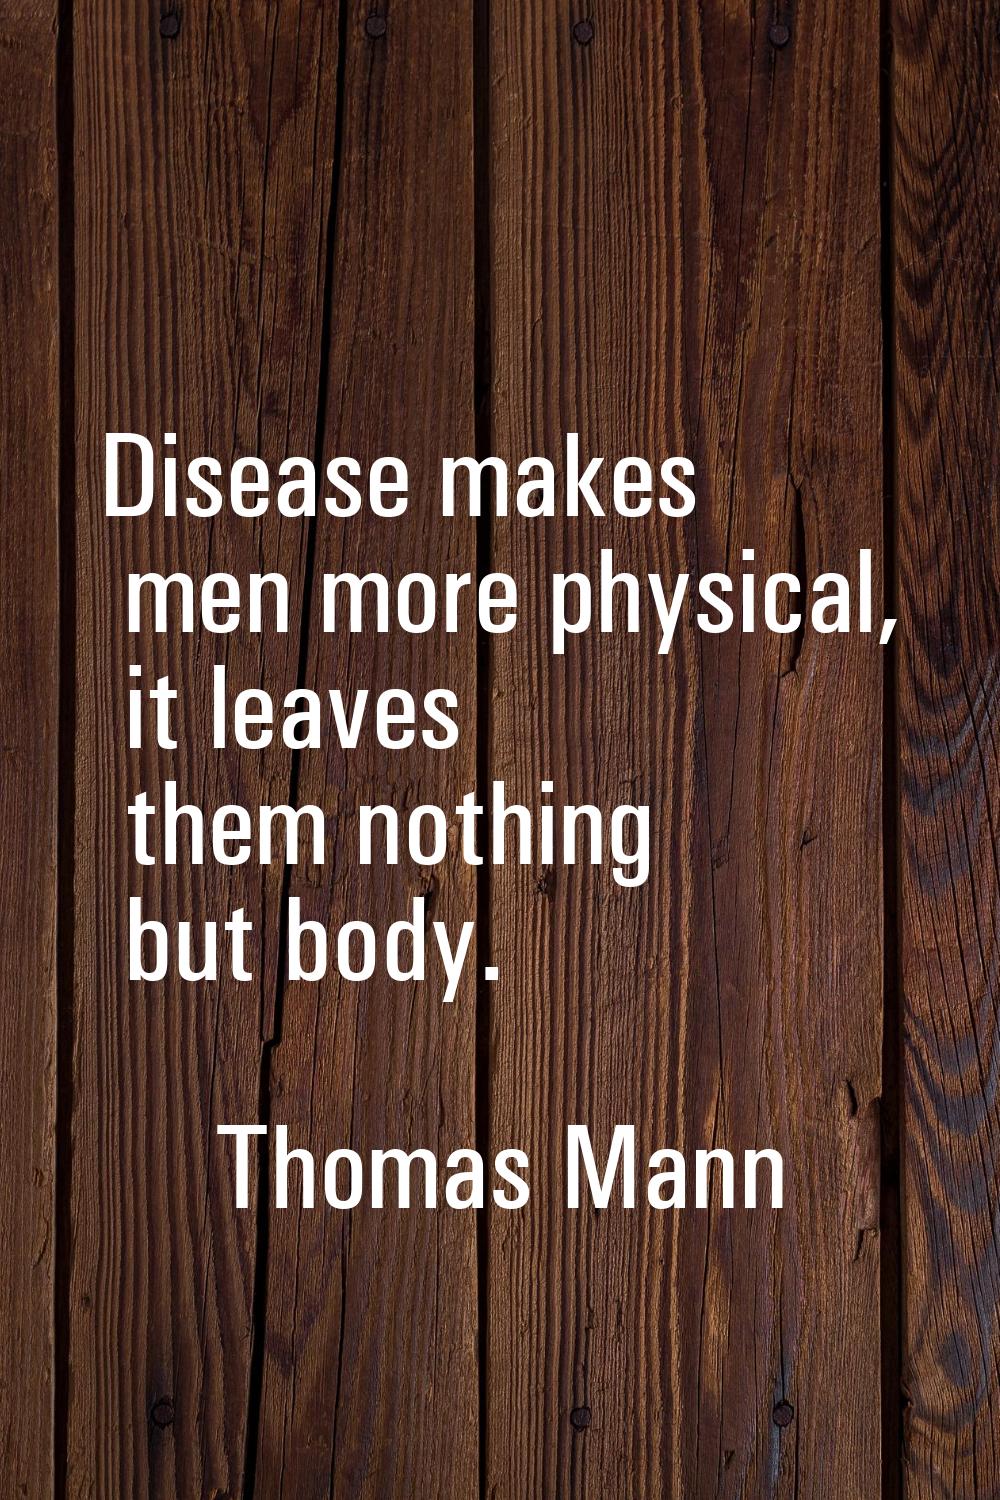 Disease makes men more physical, it leaves them nothing but body.